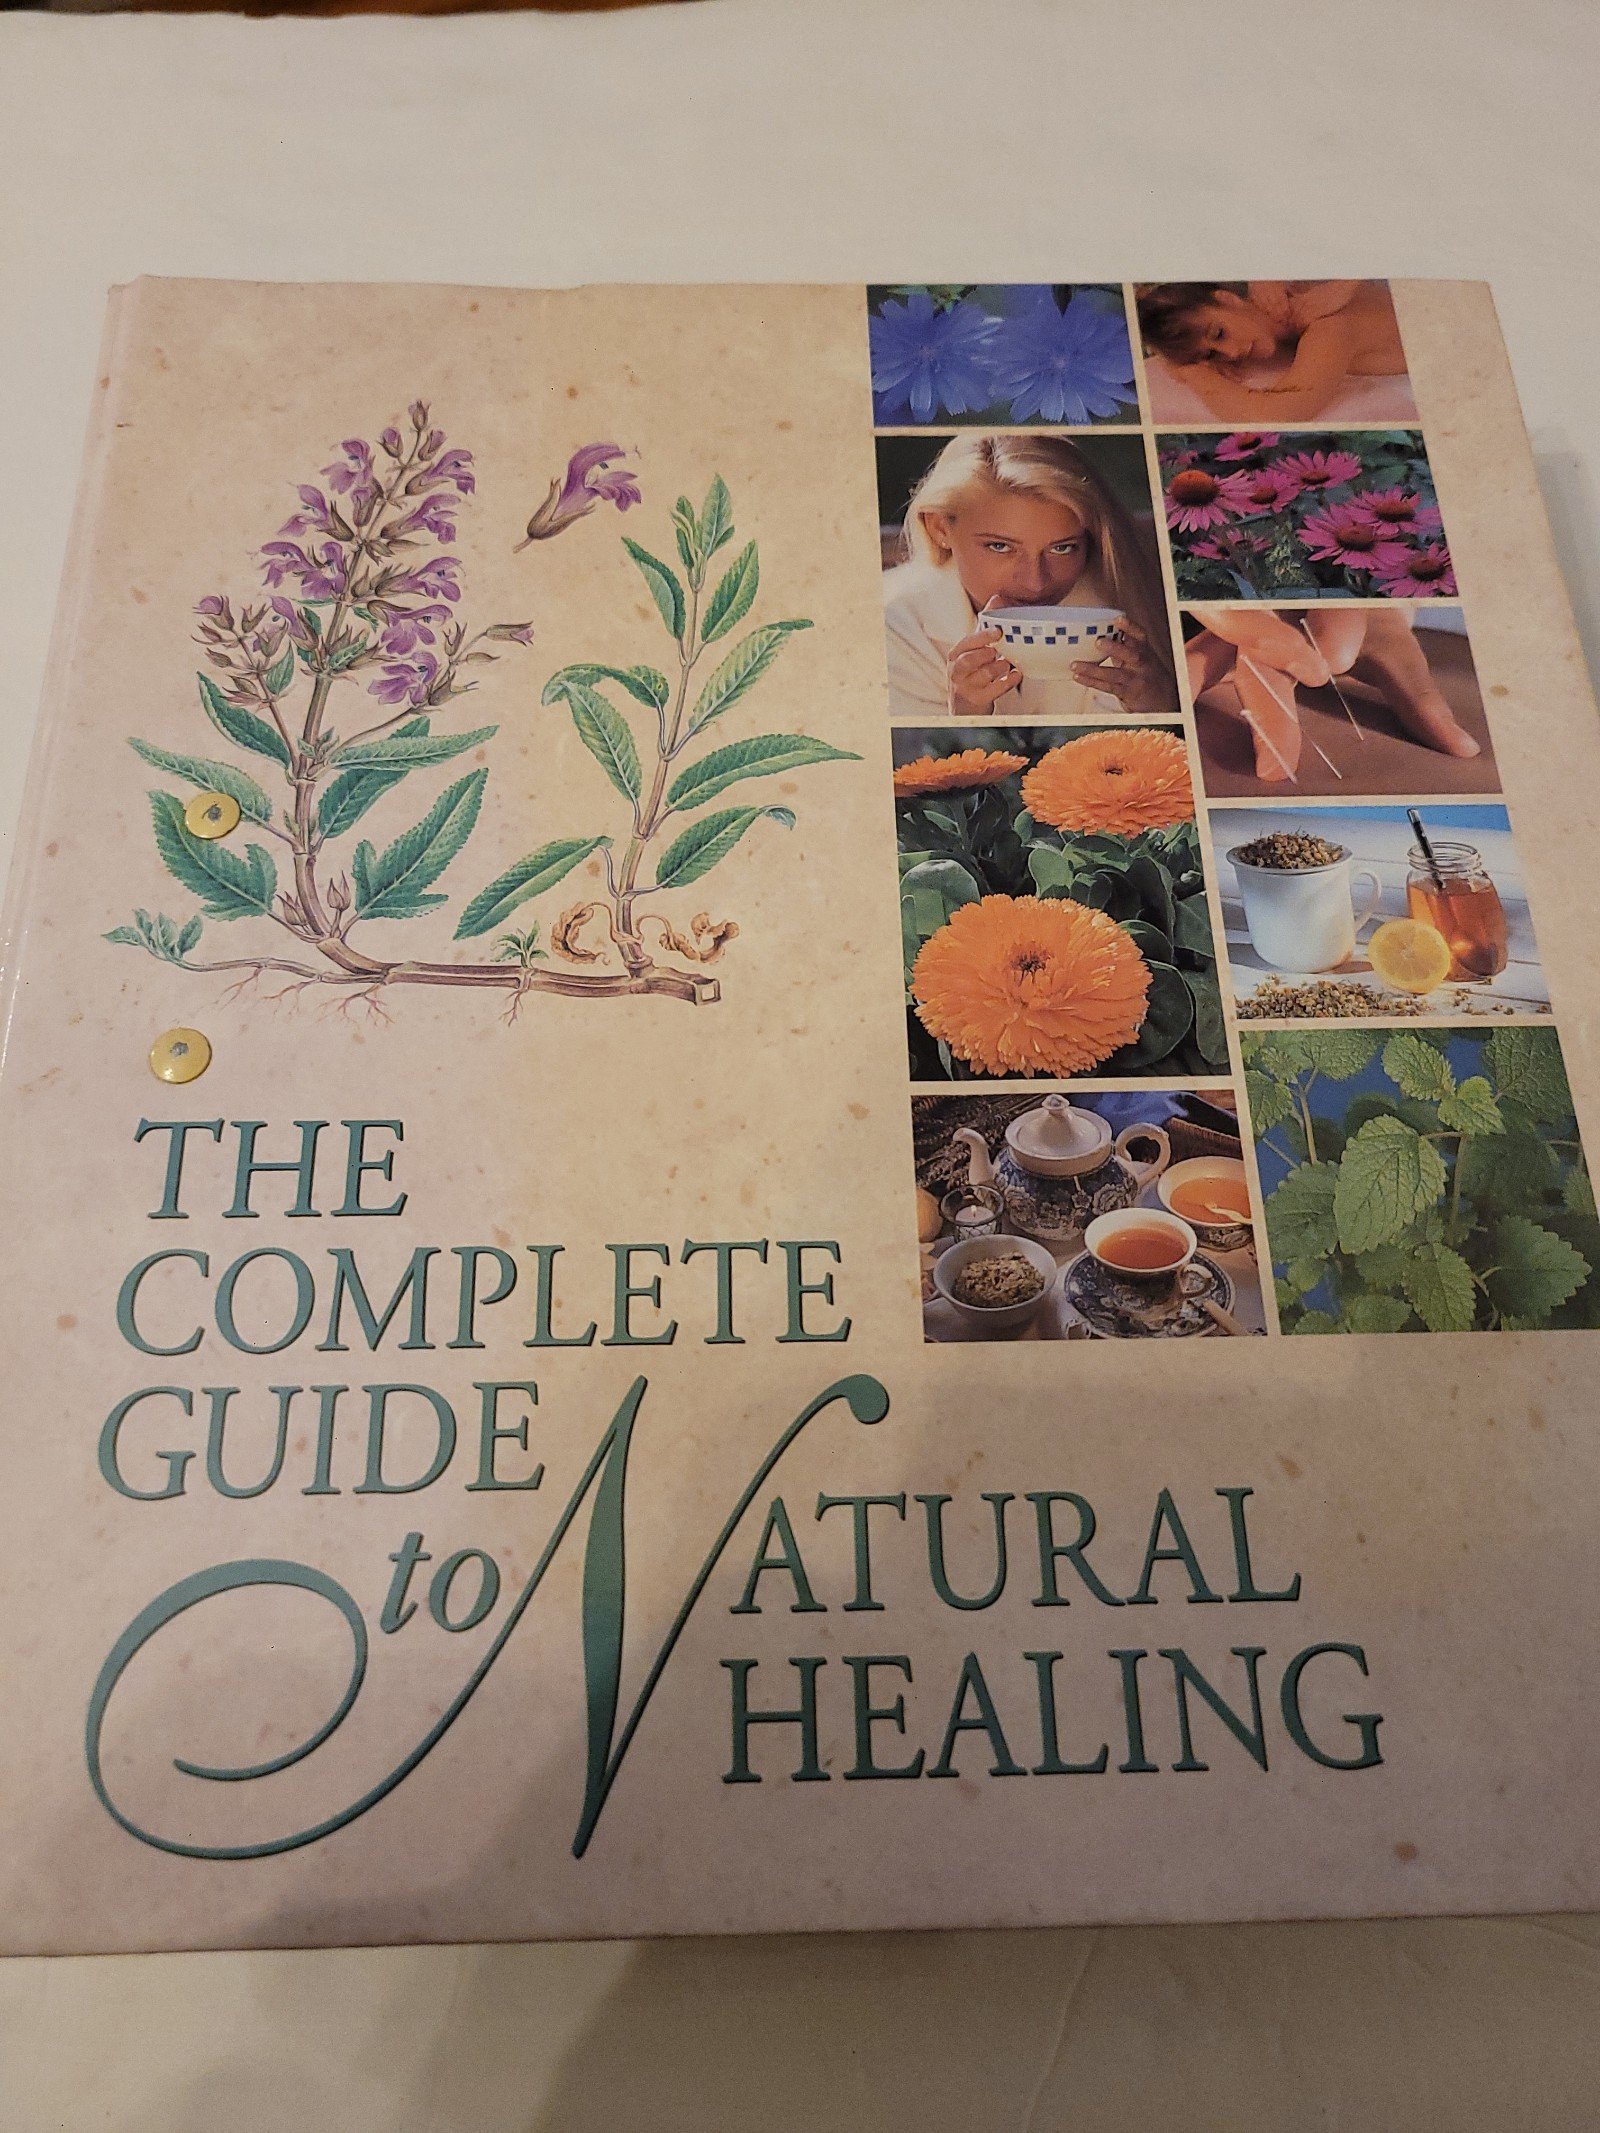 The Complete Guide to Natural Healing Ebh5obVWx